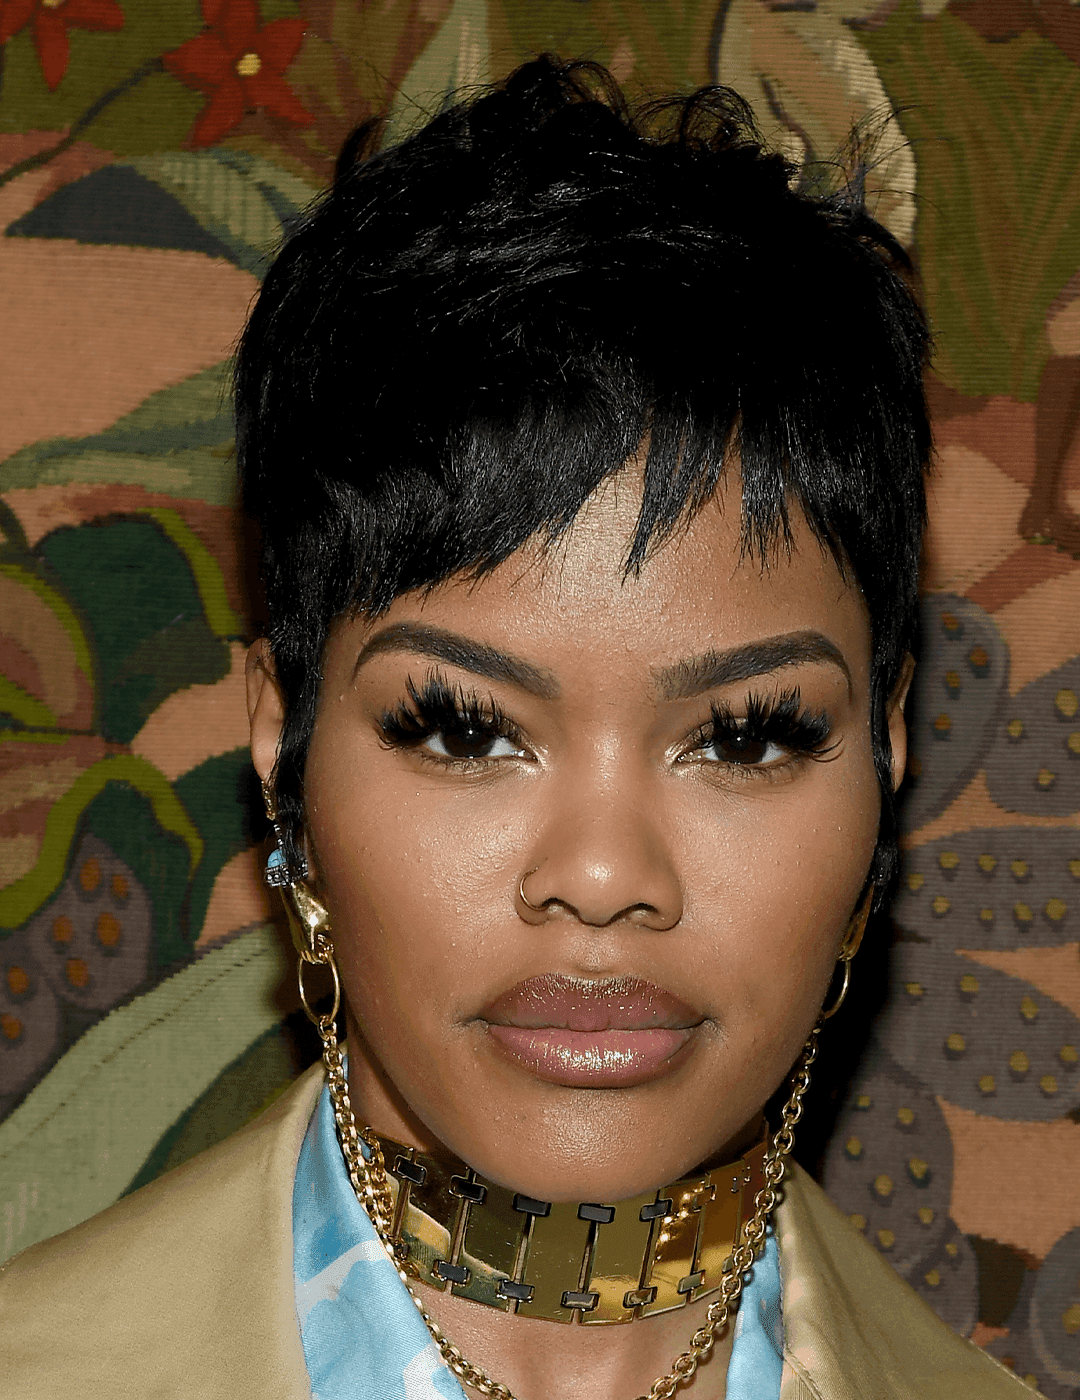 Teyana Taylor rocking a choppy pixie cut hairstyle, dangling gold earrings, gold chain choker, and neutral makeup look